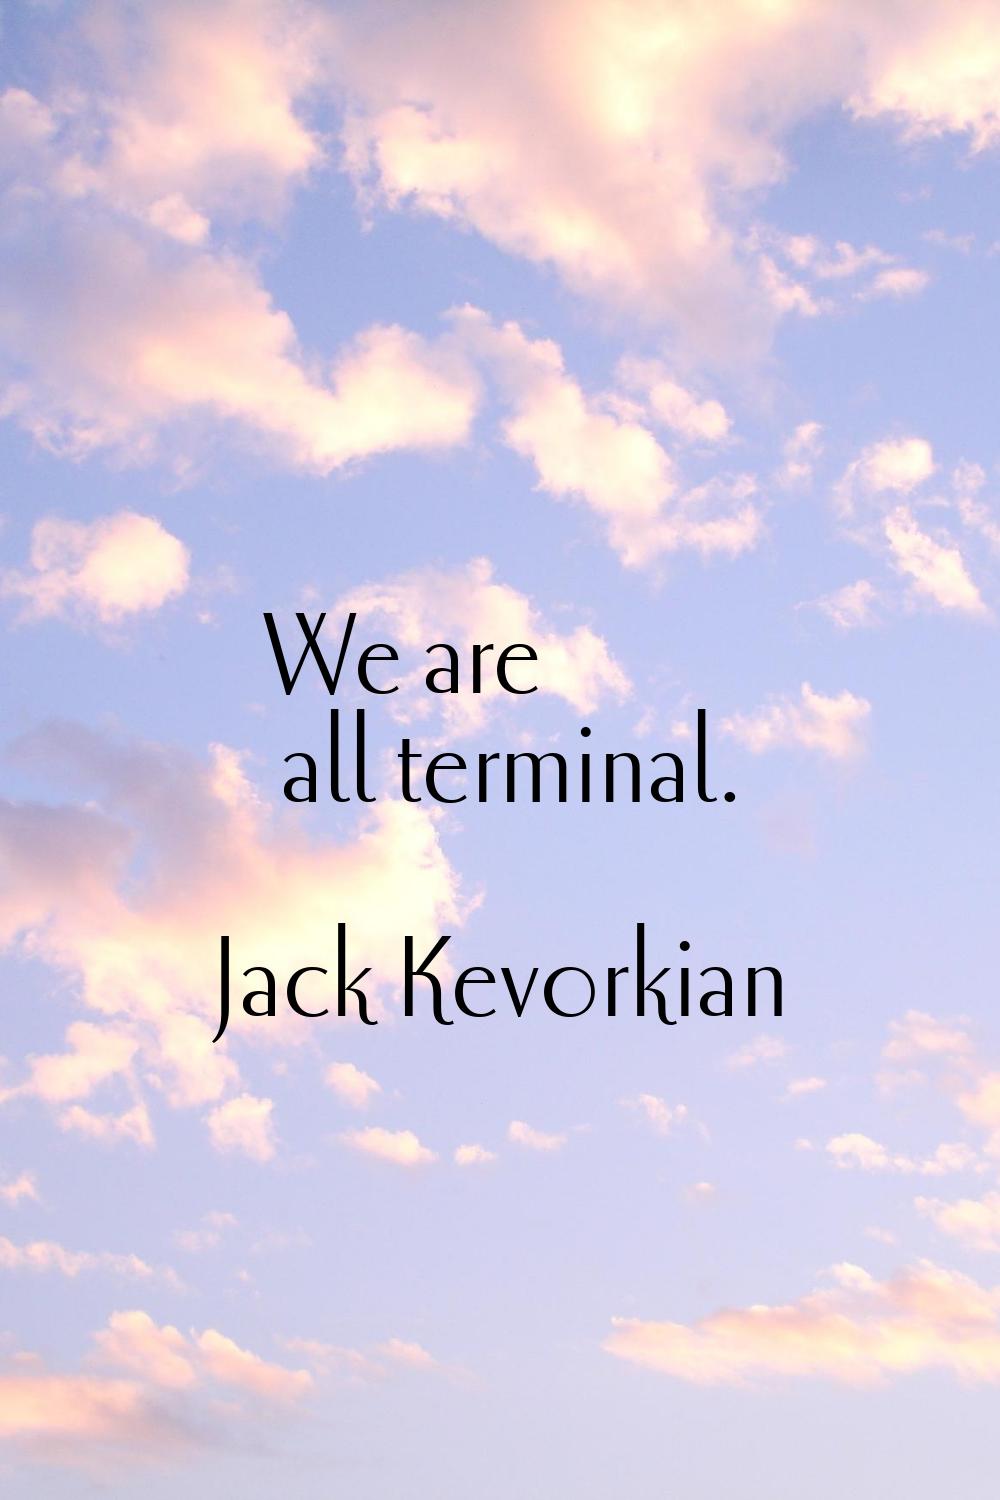 We are all terminal.